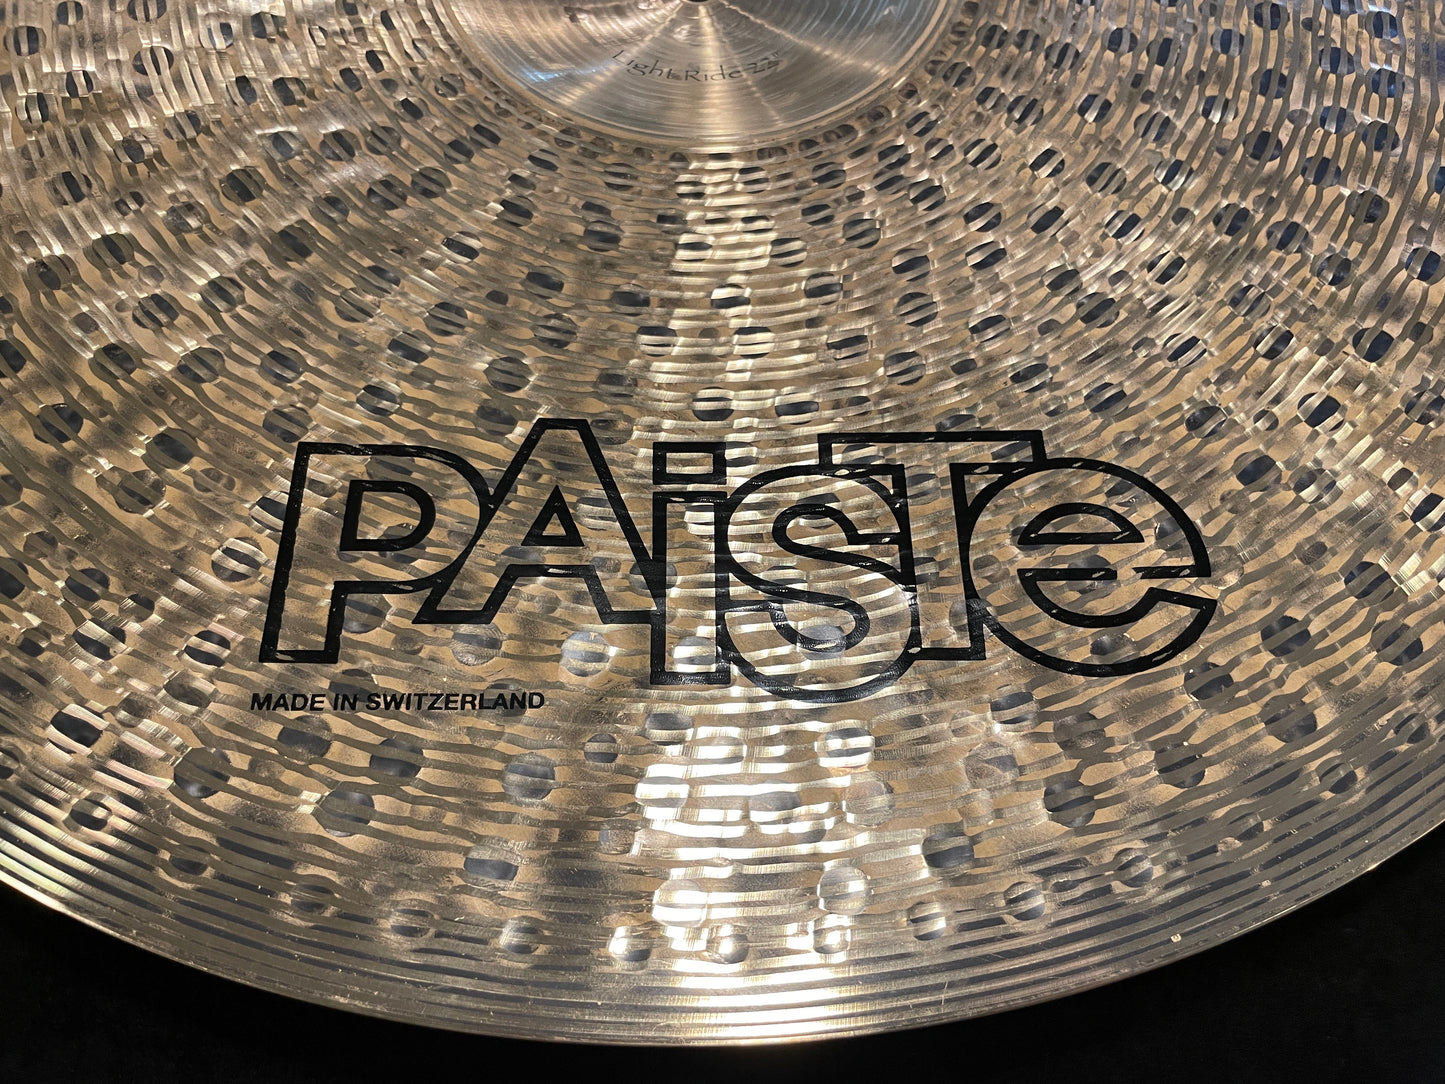 22" Paiste Signature Traditionals Light Ride Cymbal 2550g